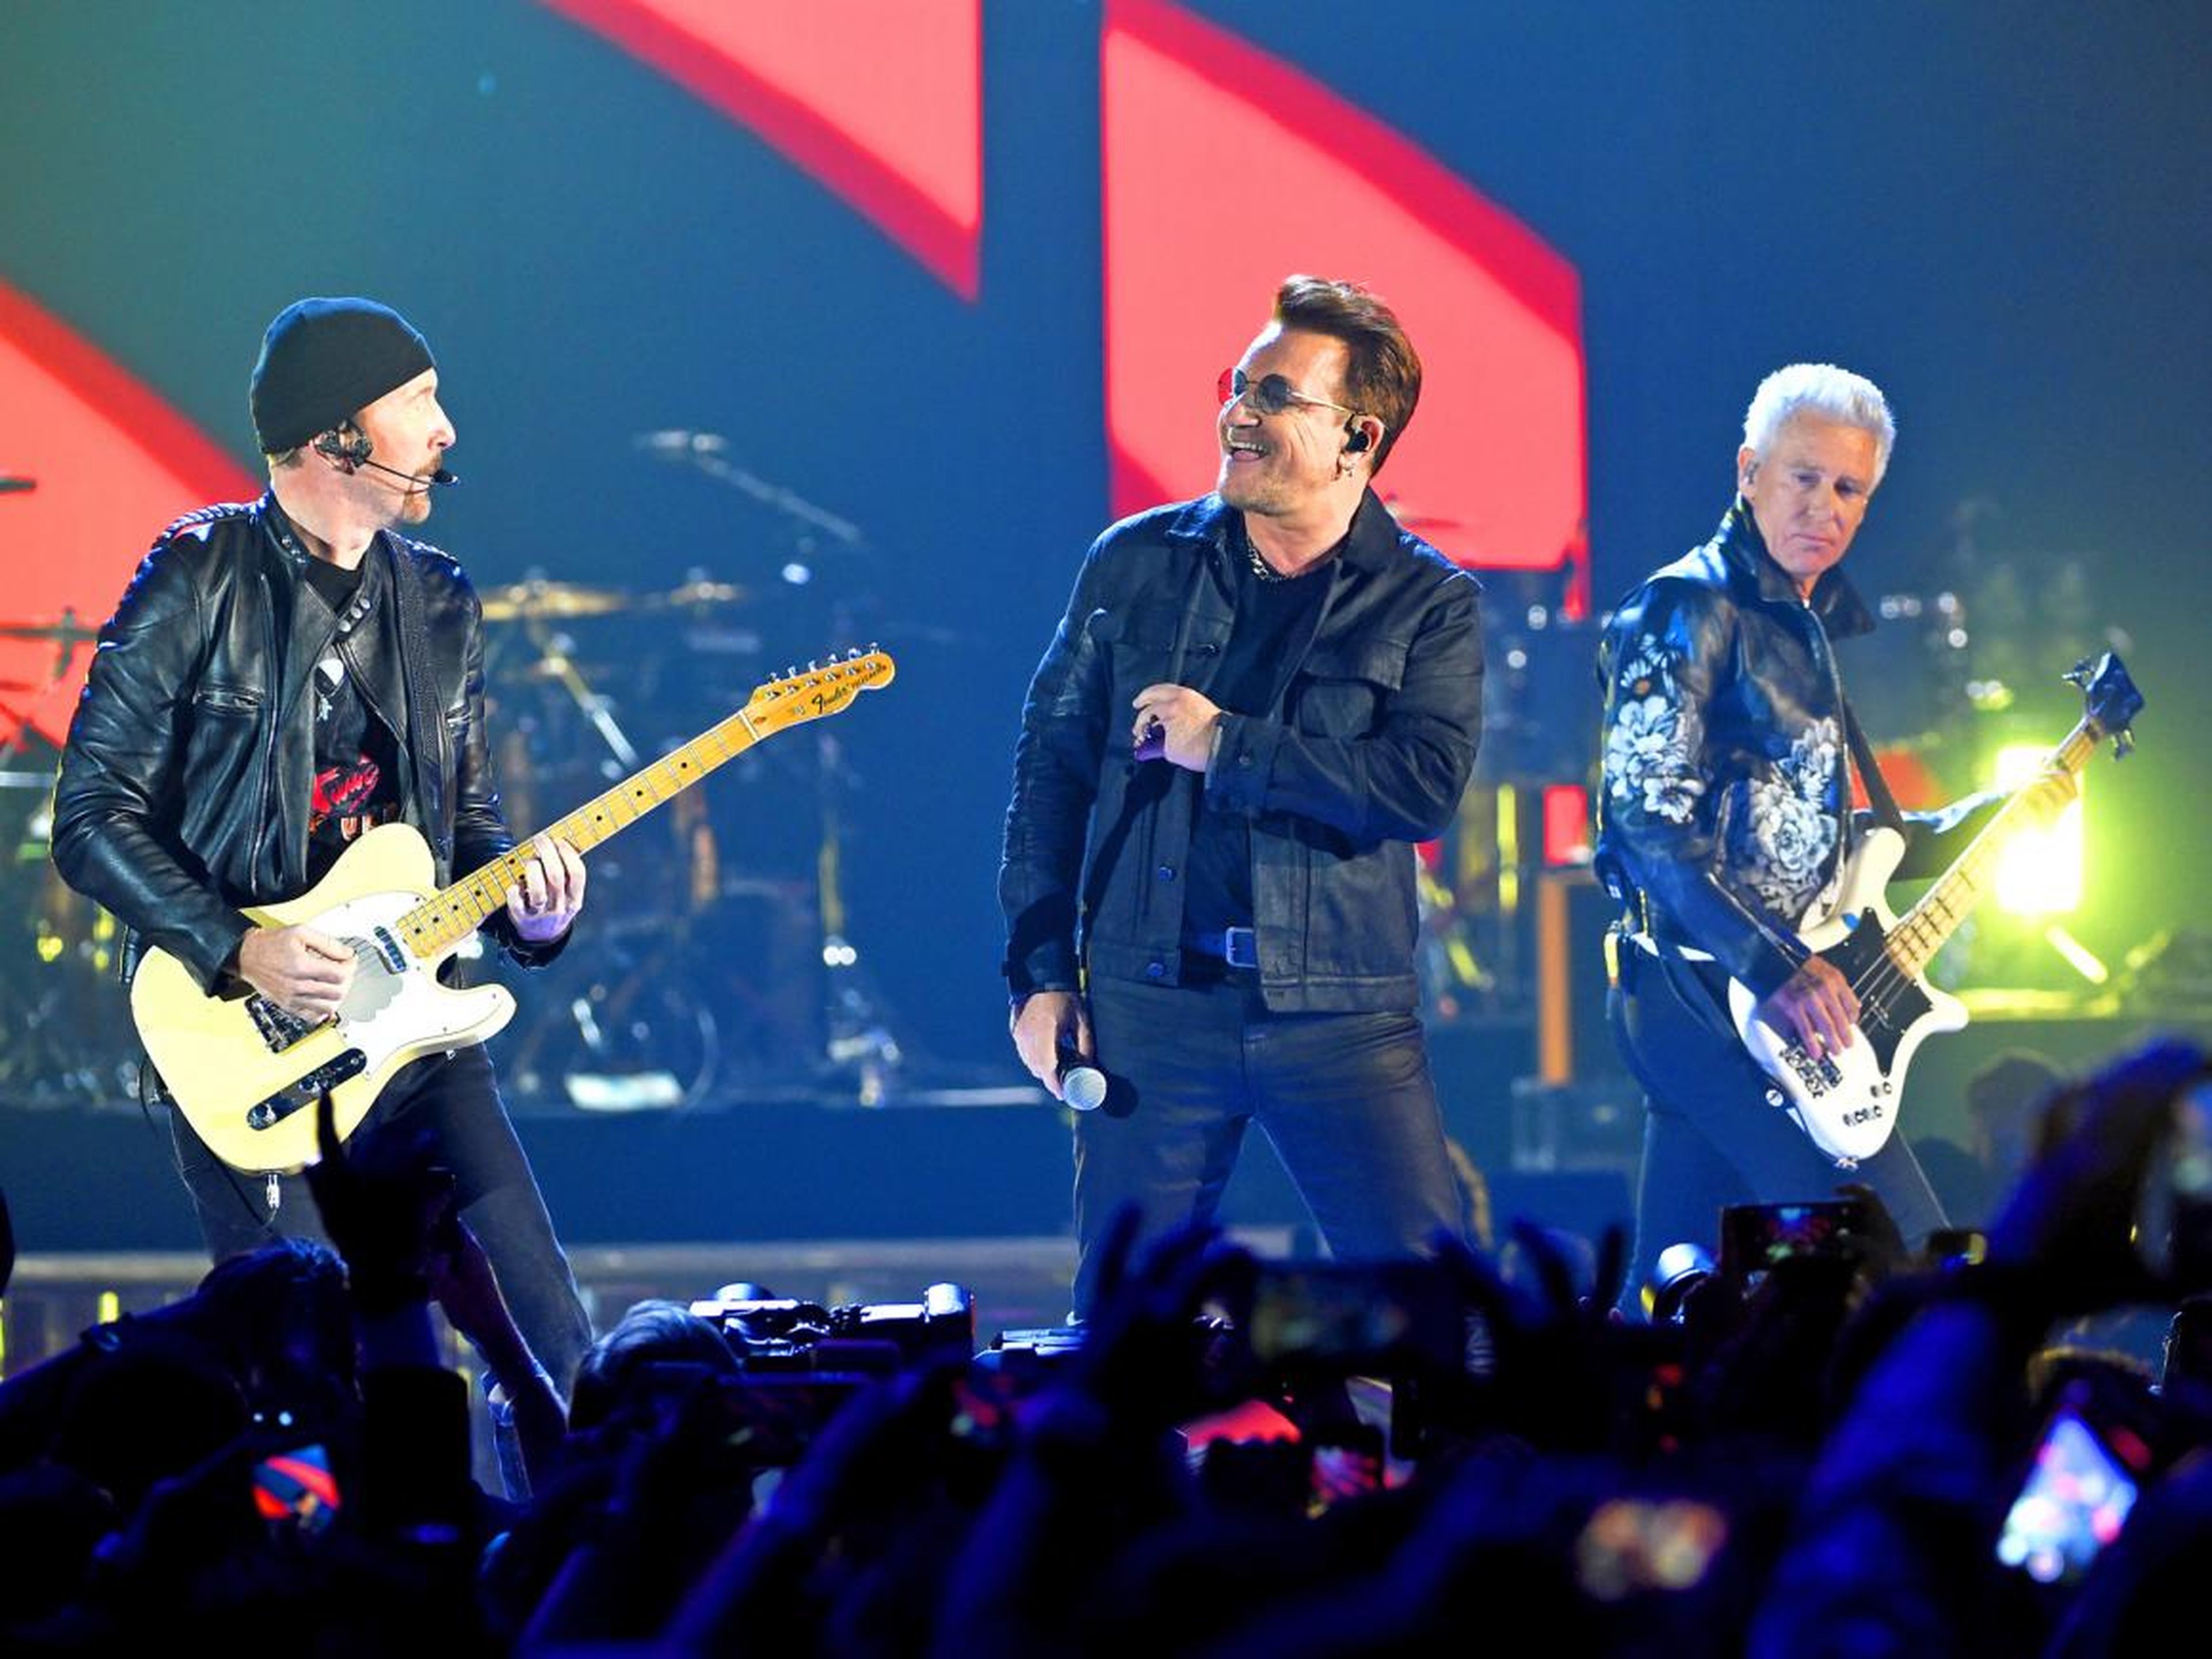 U2 was the highest-paid musical act in 2017 earning $54.4 million according to Billboard's annual Money Makers report. About 95% of the group's total earnings came from touring.